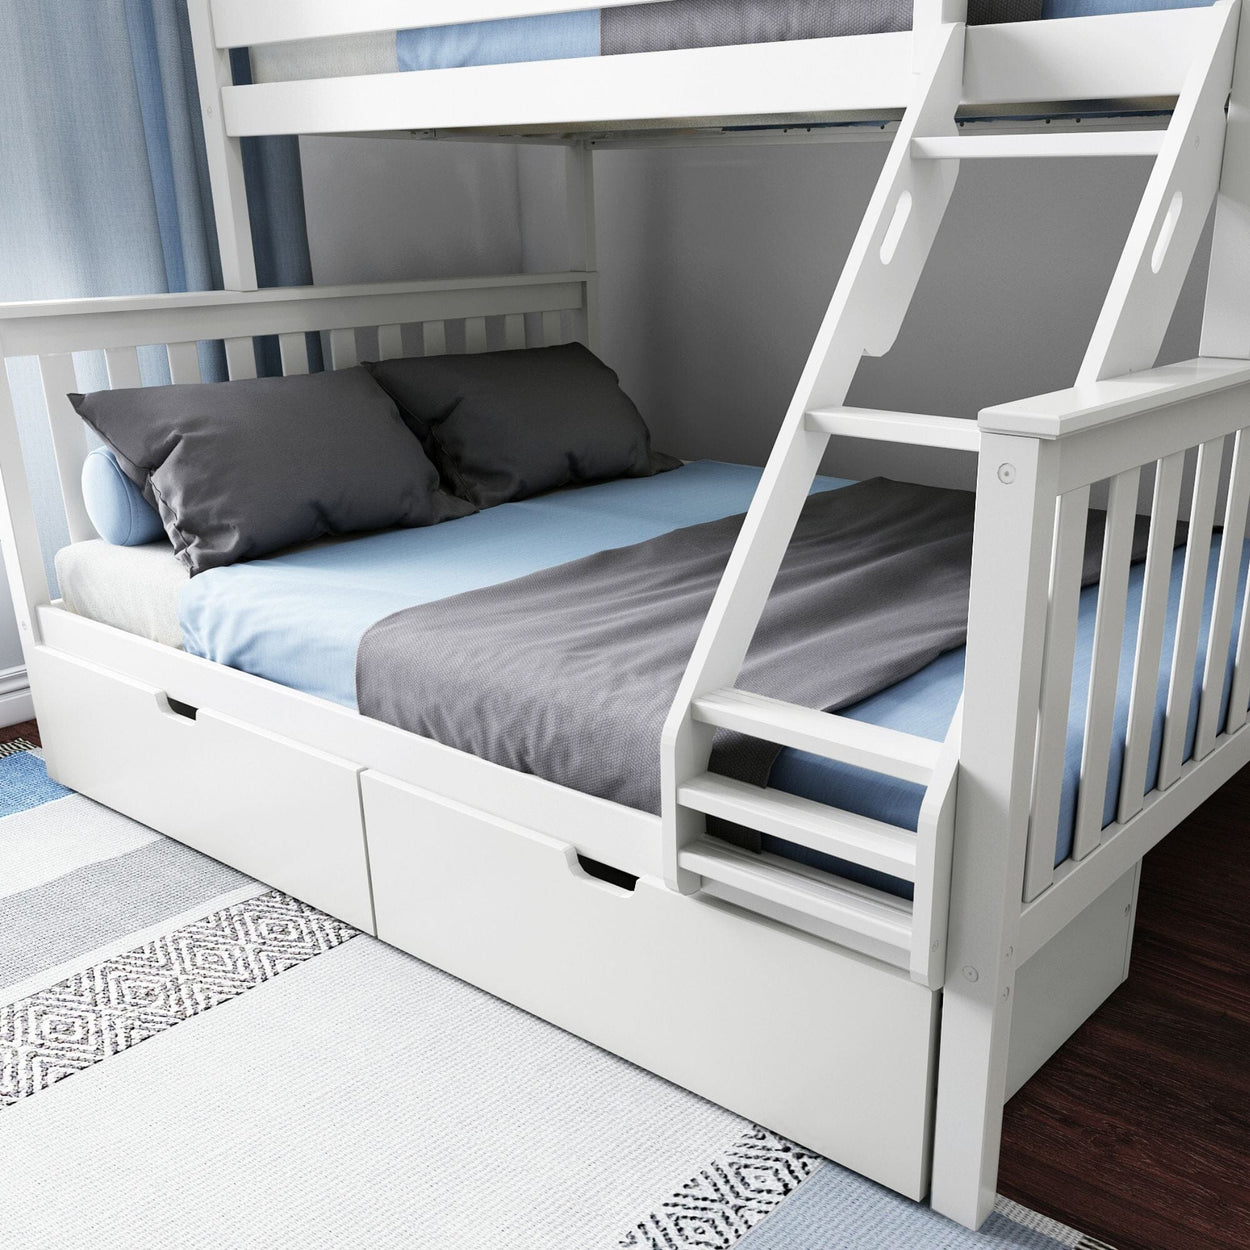 187331-002 : Bunk Beds Twin XL over Queen Bunk Bed with Storage Drawers, White